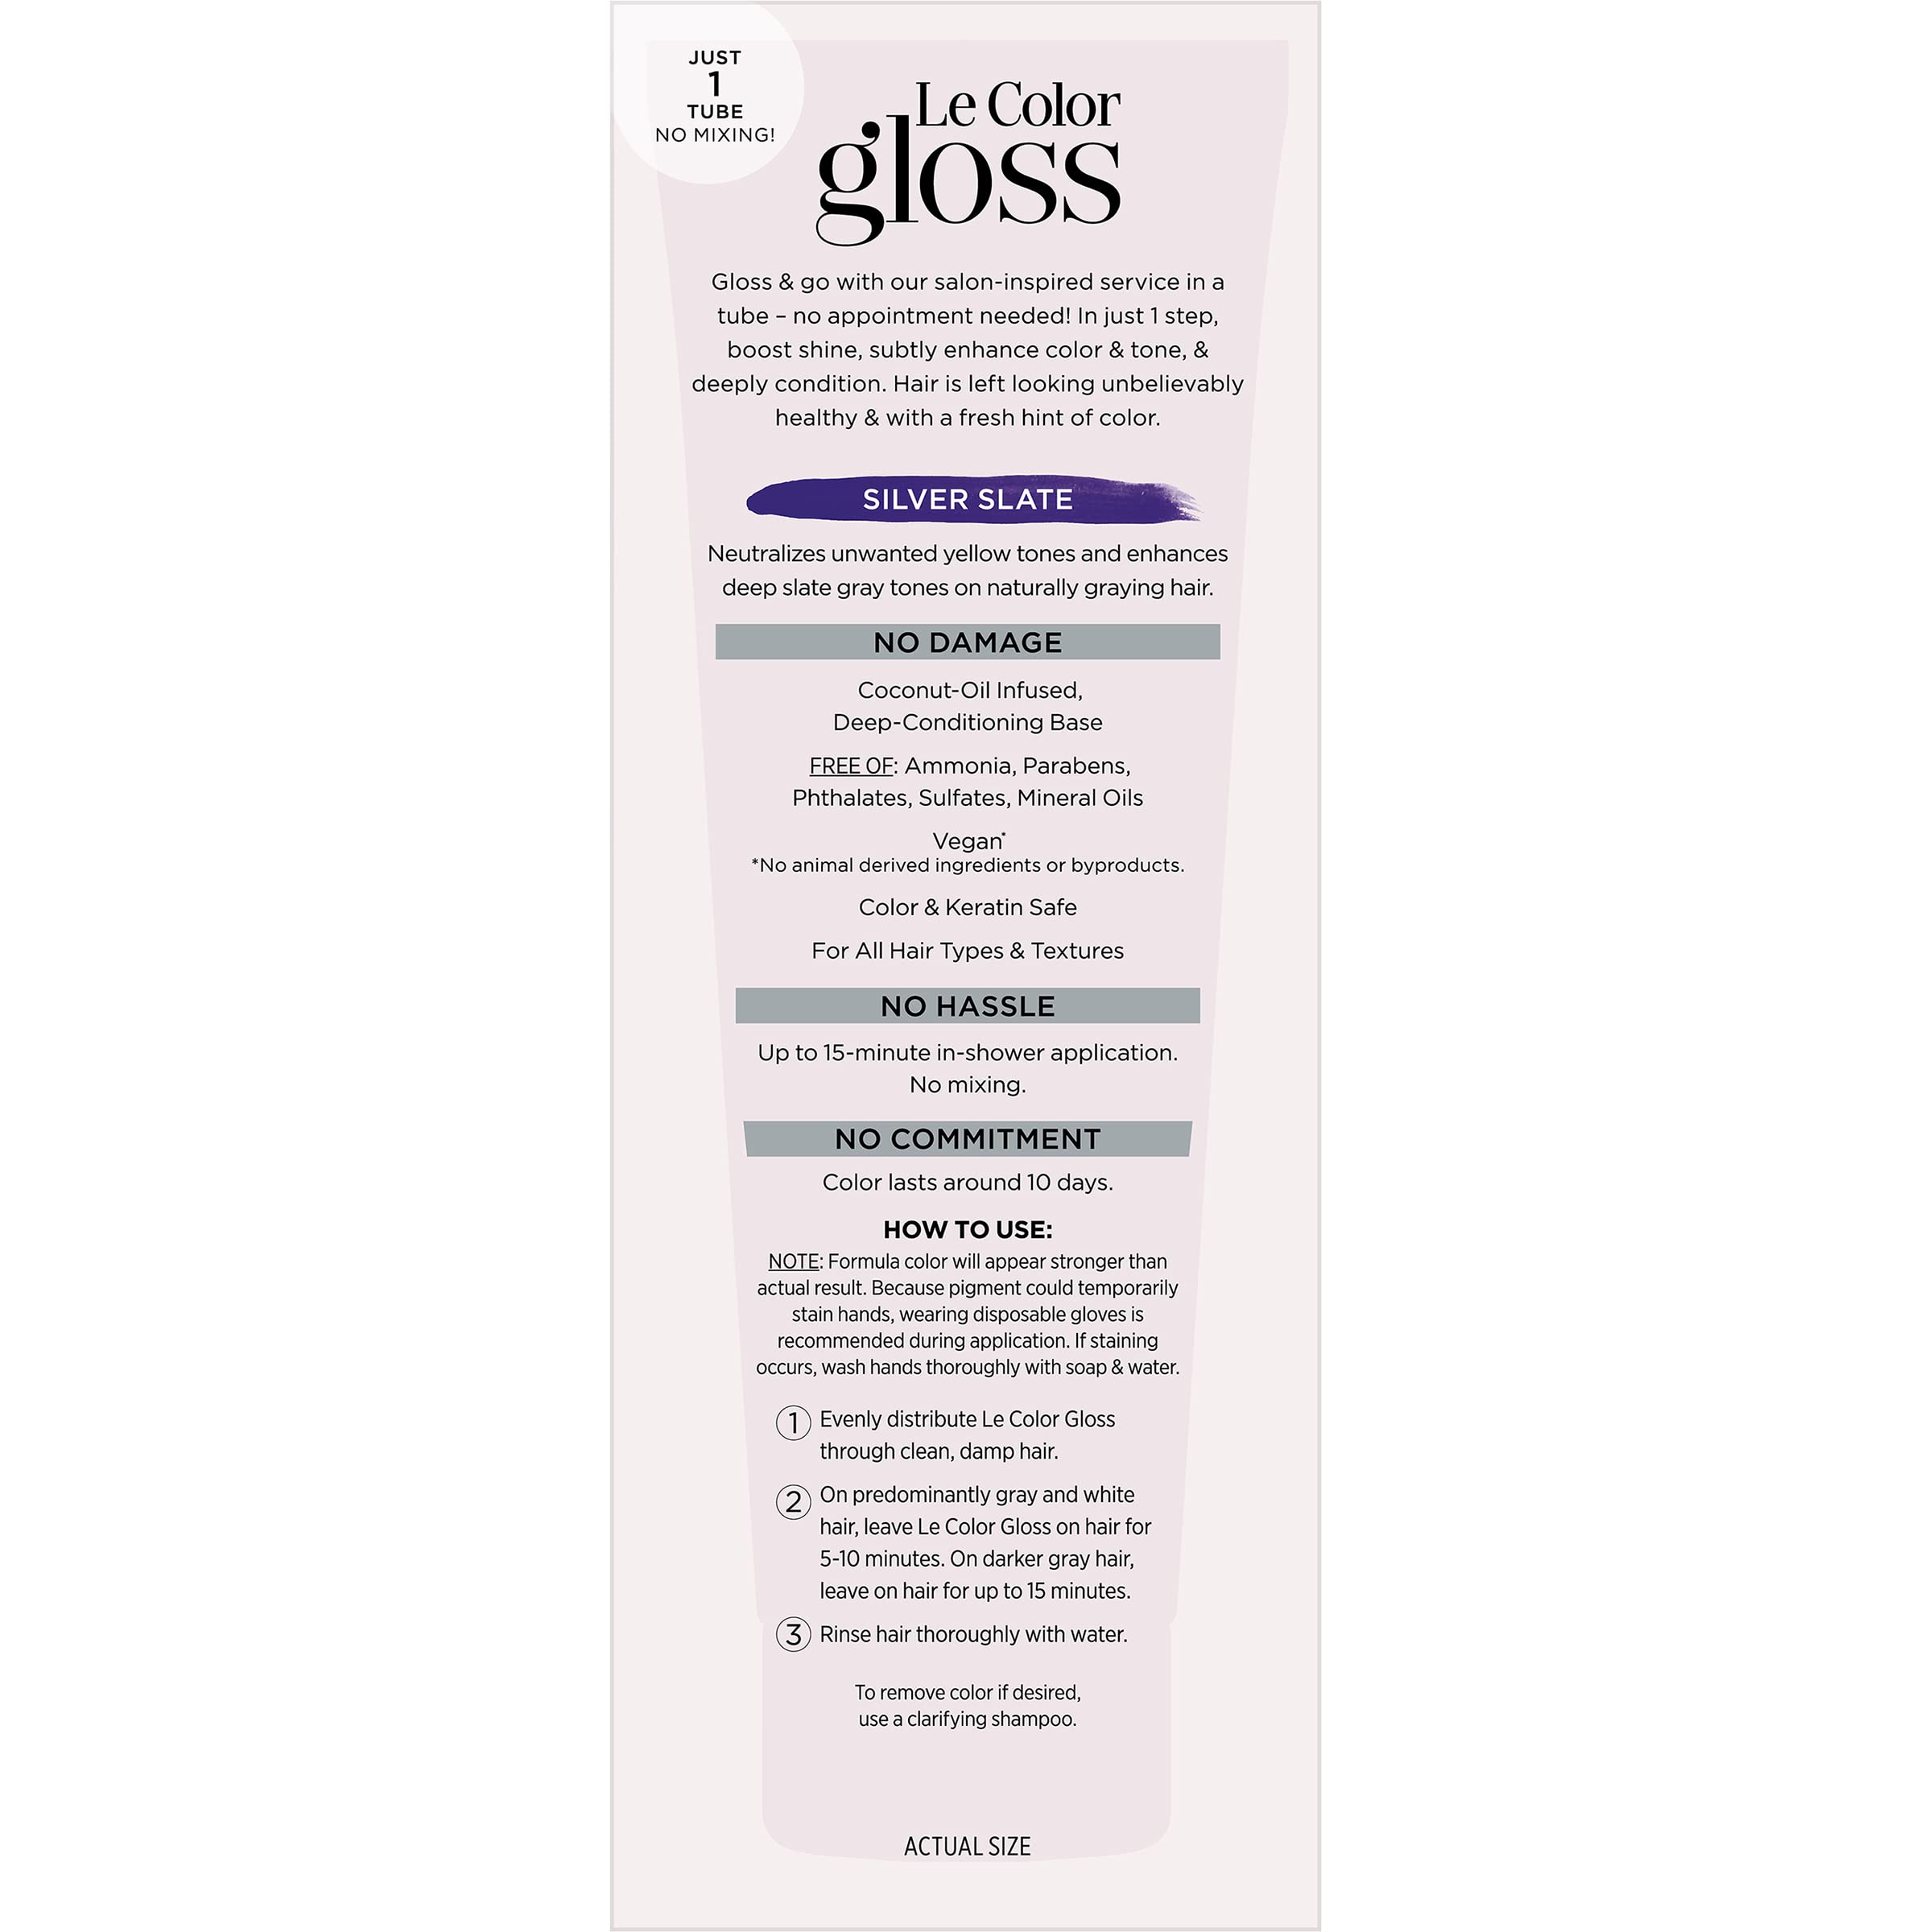 L’Oréal Paris Le Color Gloss One Step Toning Gloss, In-Shower Hair Toner with Deep Conditioning Treatment Formula for Gray Hair, Silver Slate, 1 Kit, 32.626 cubic_inches